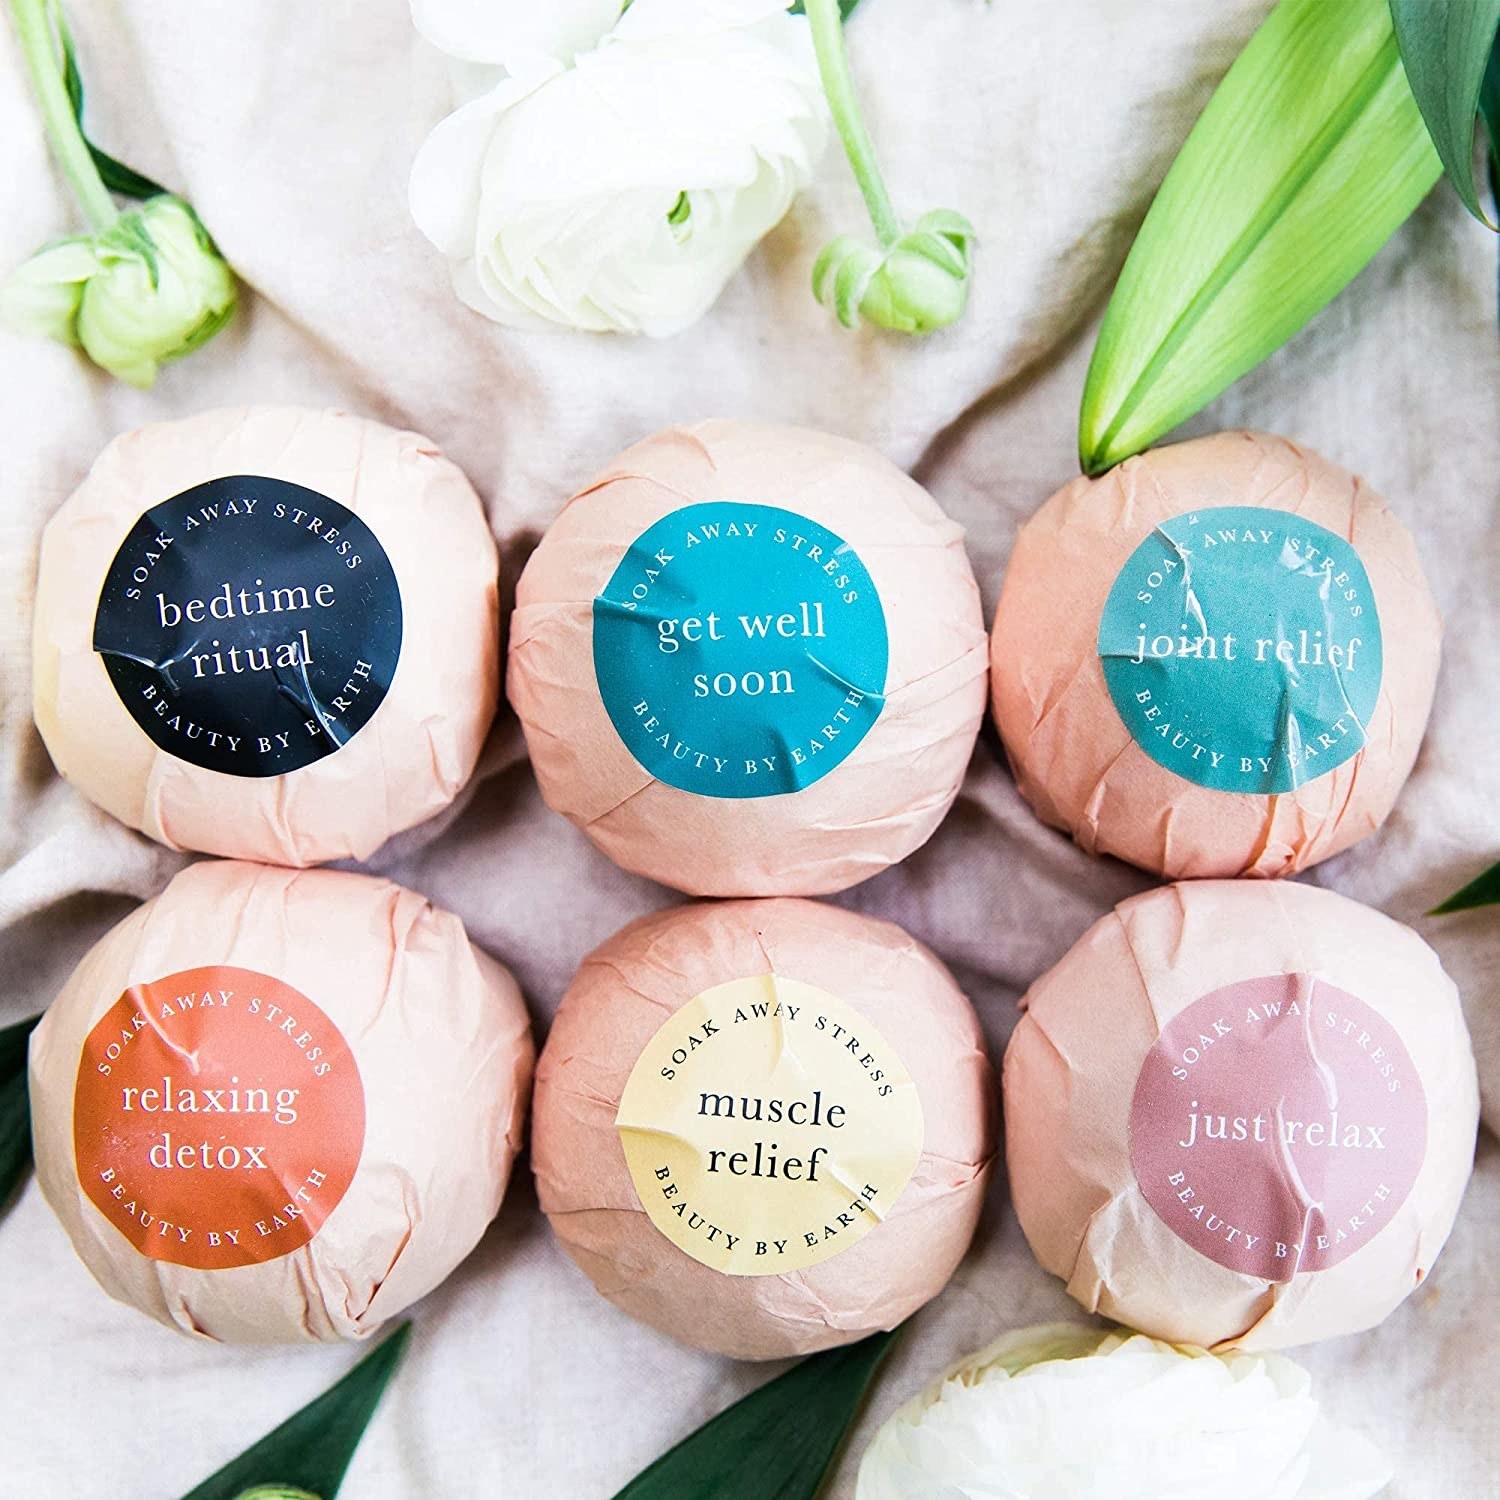 Six bath bombs that are wrapped up in paper